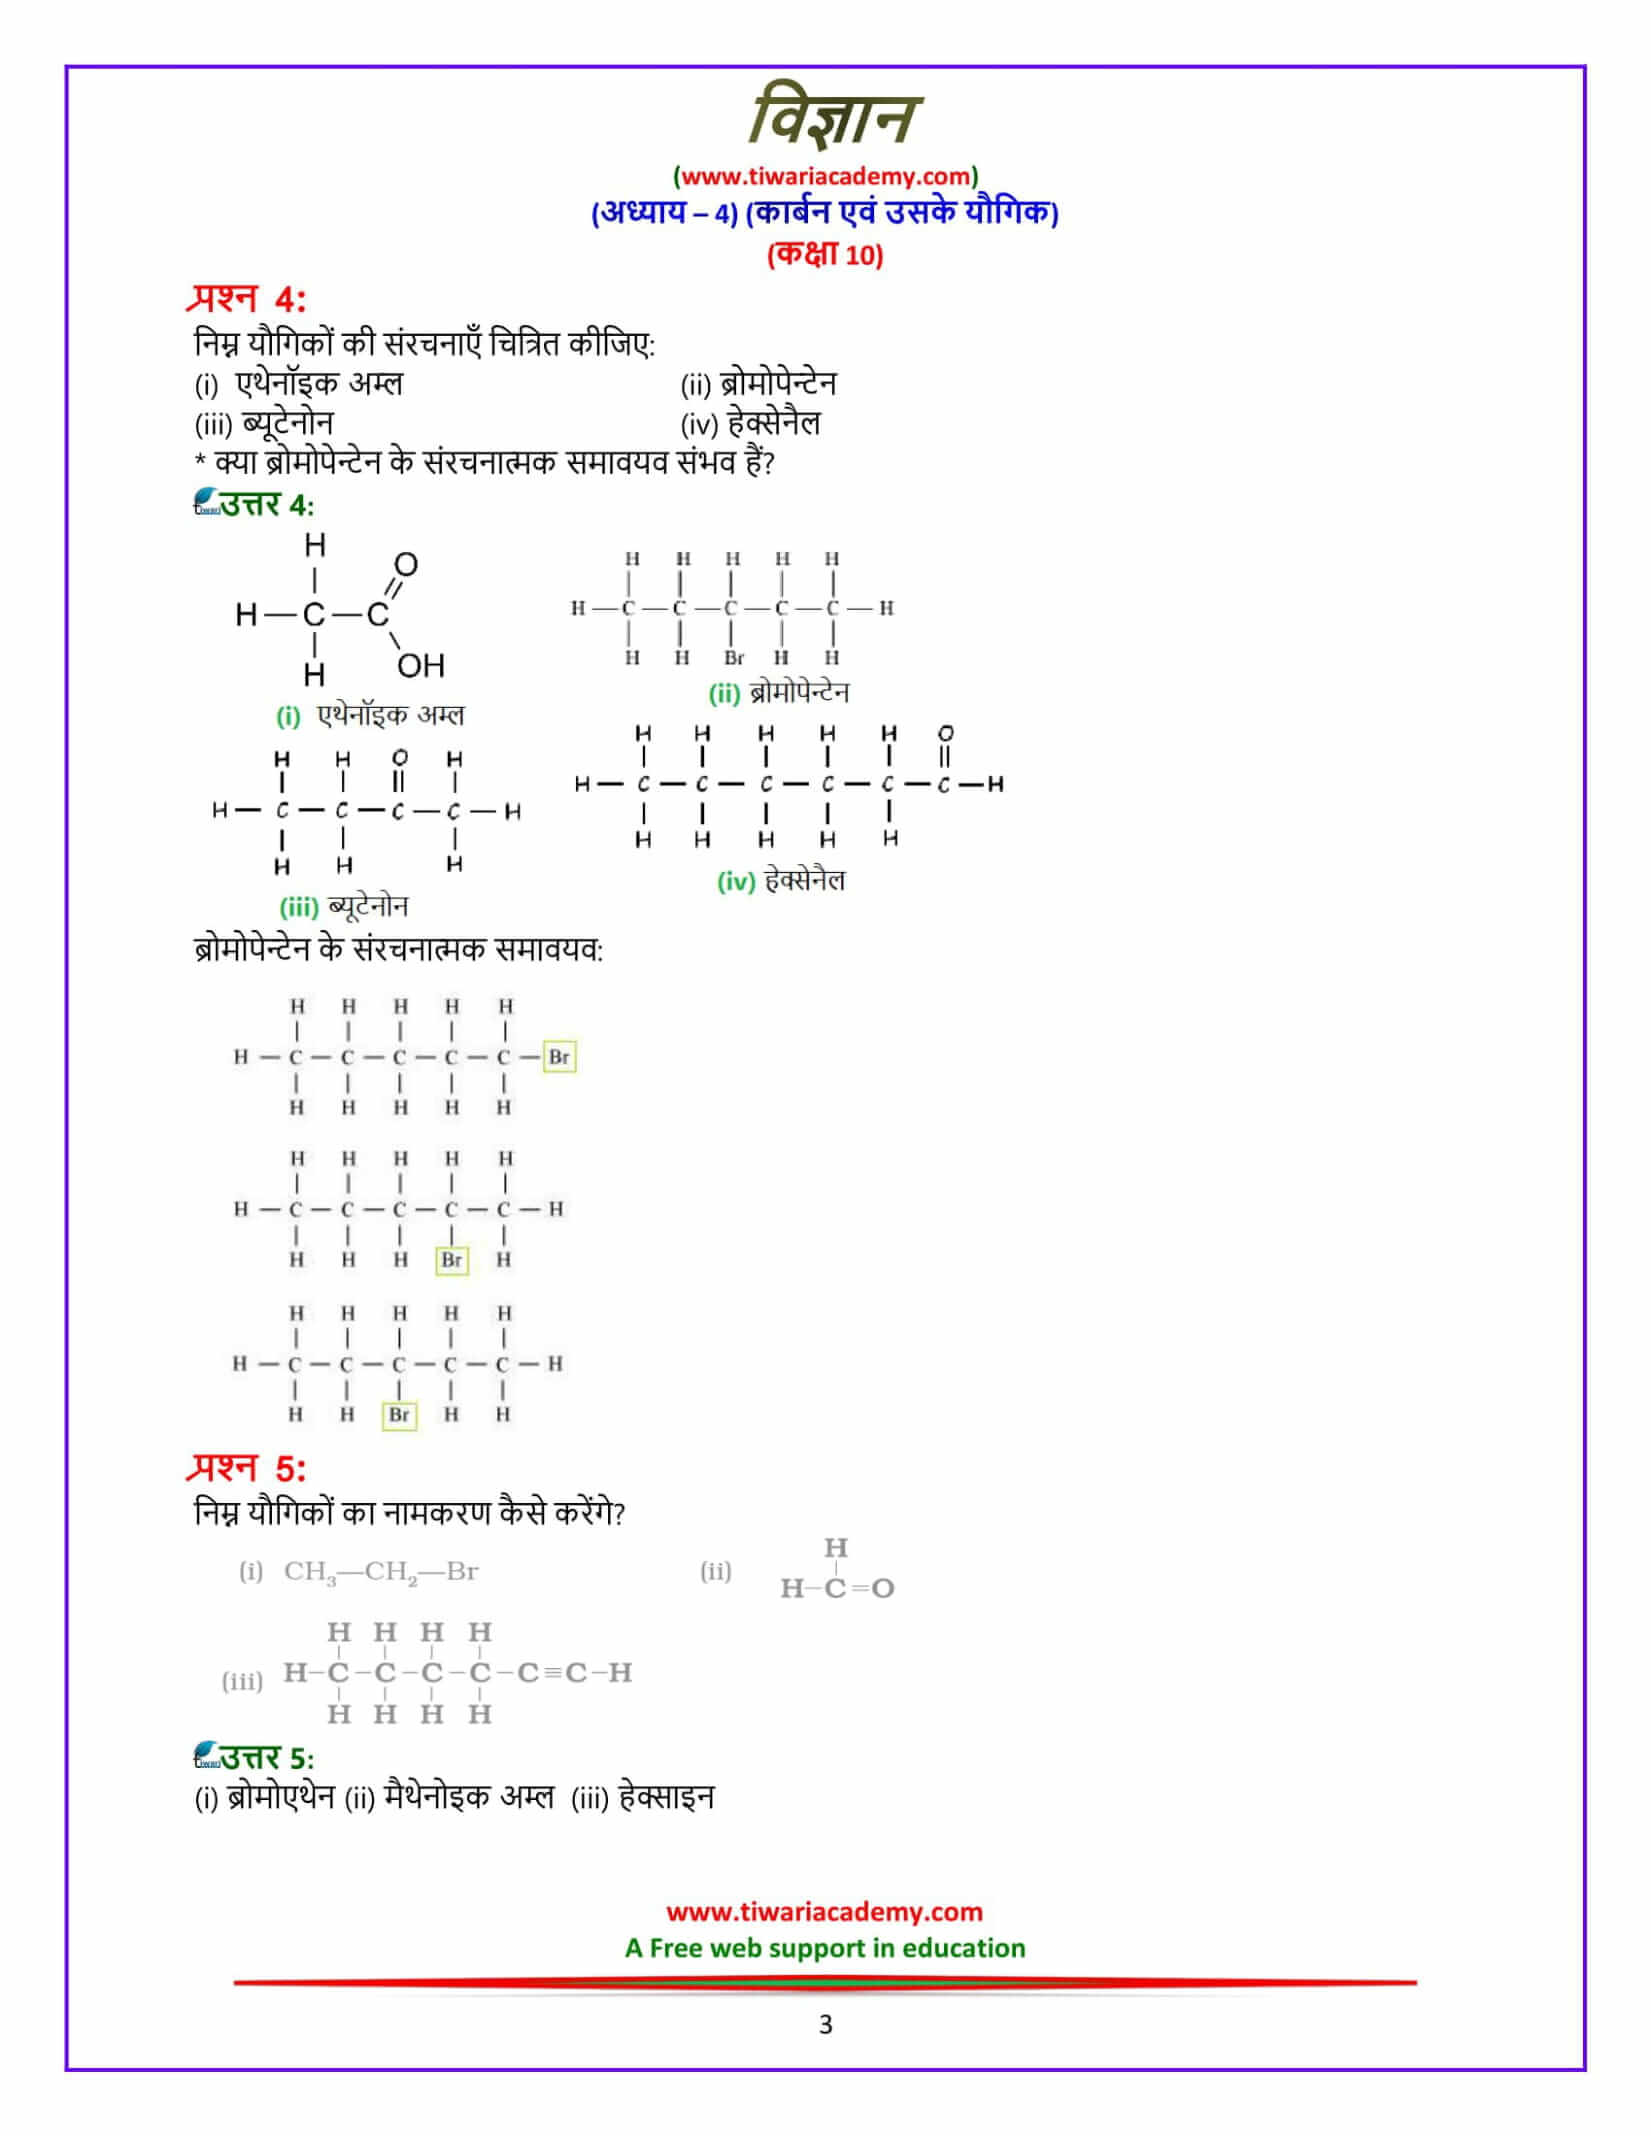 Class 10 Science Chapter 4 Carbon and its compounds page 76 answers guide free in hindi